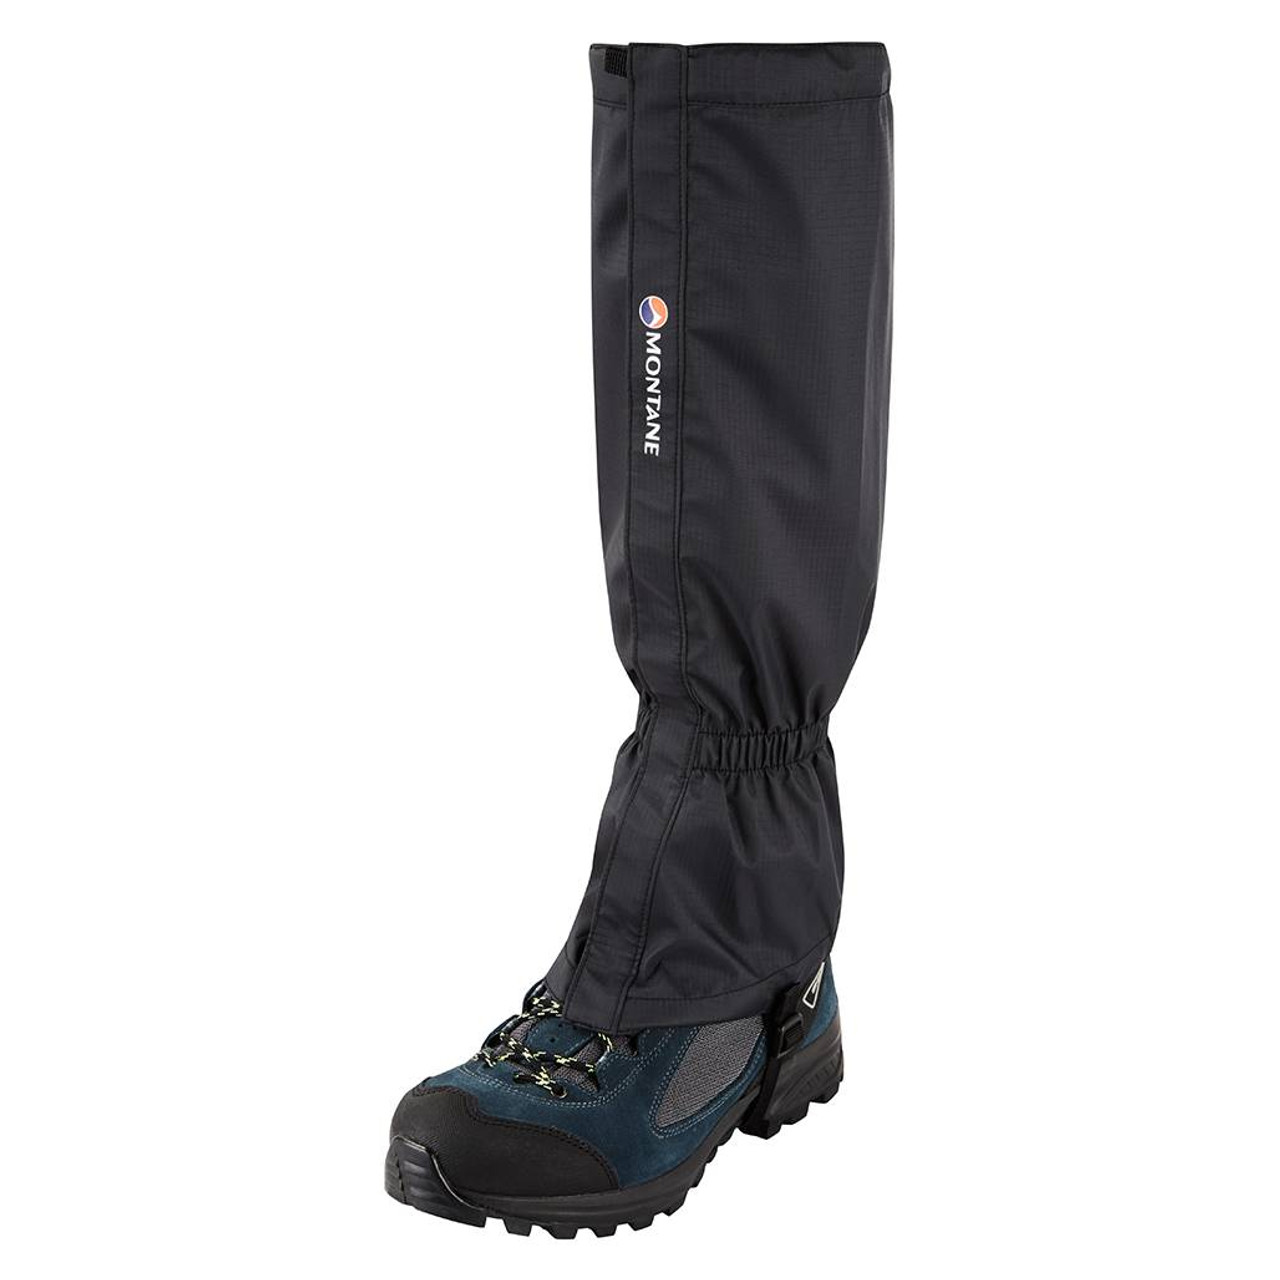 Outflow Gaiter